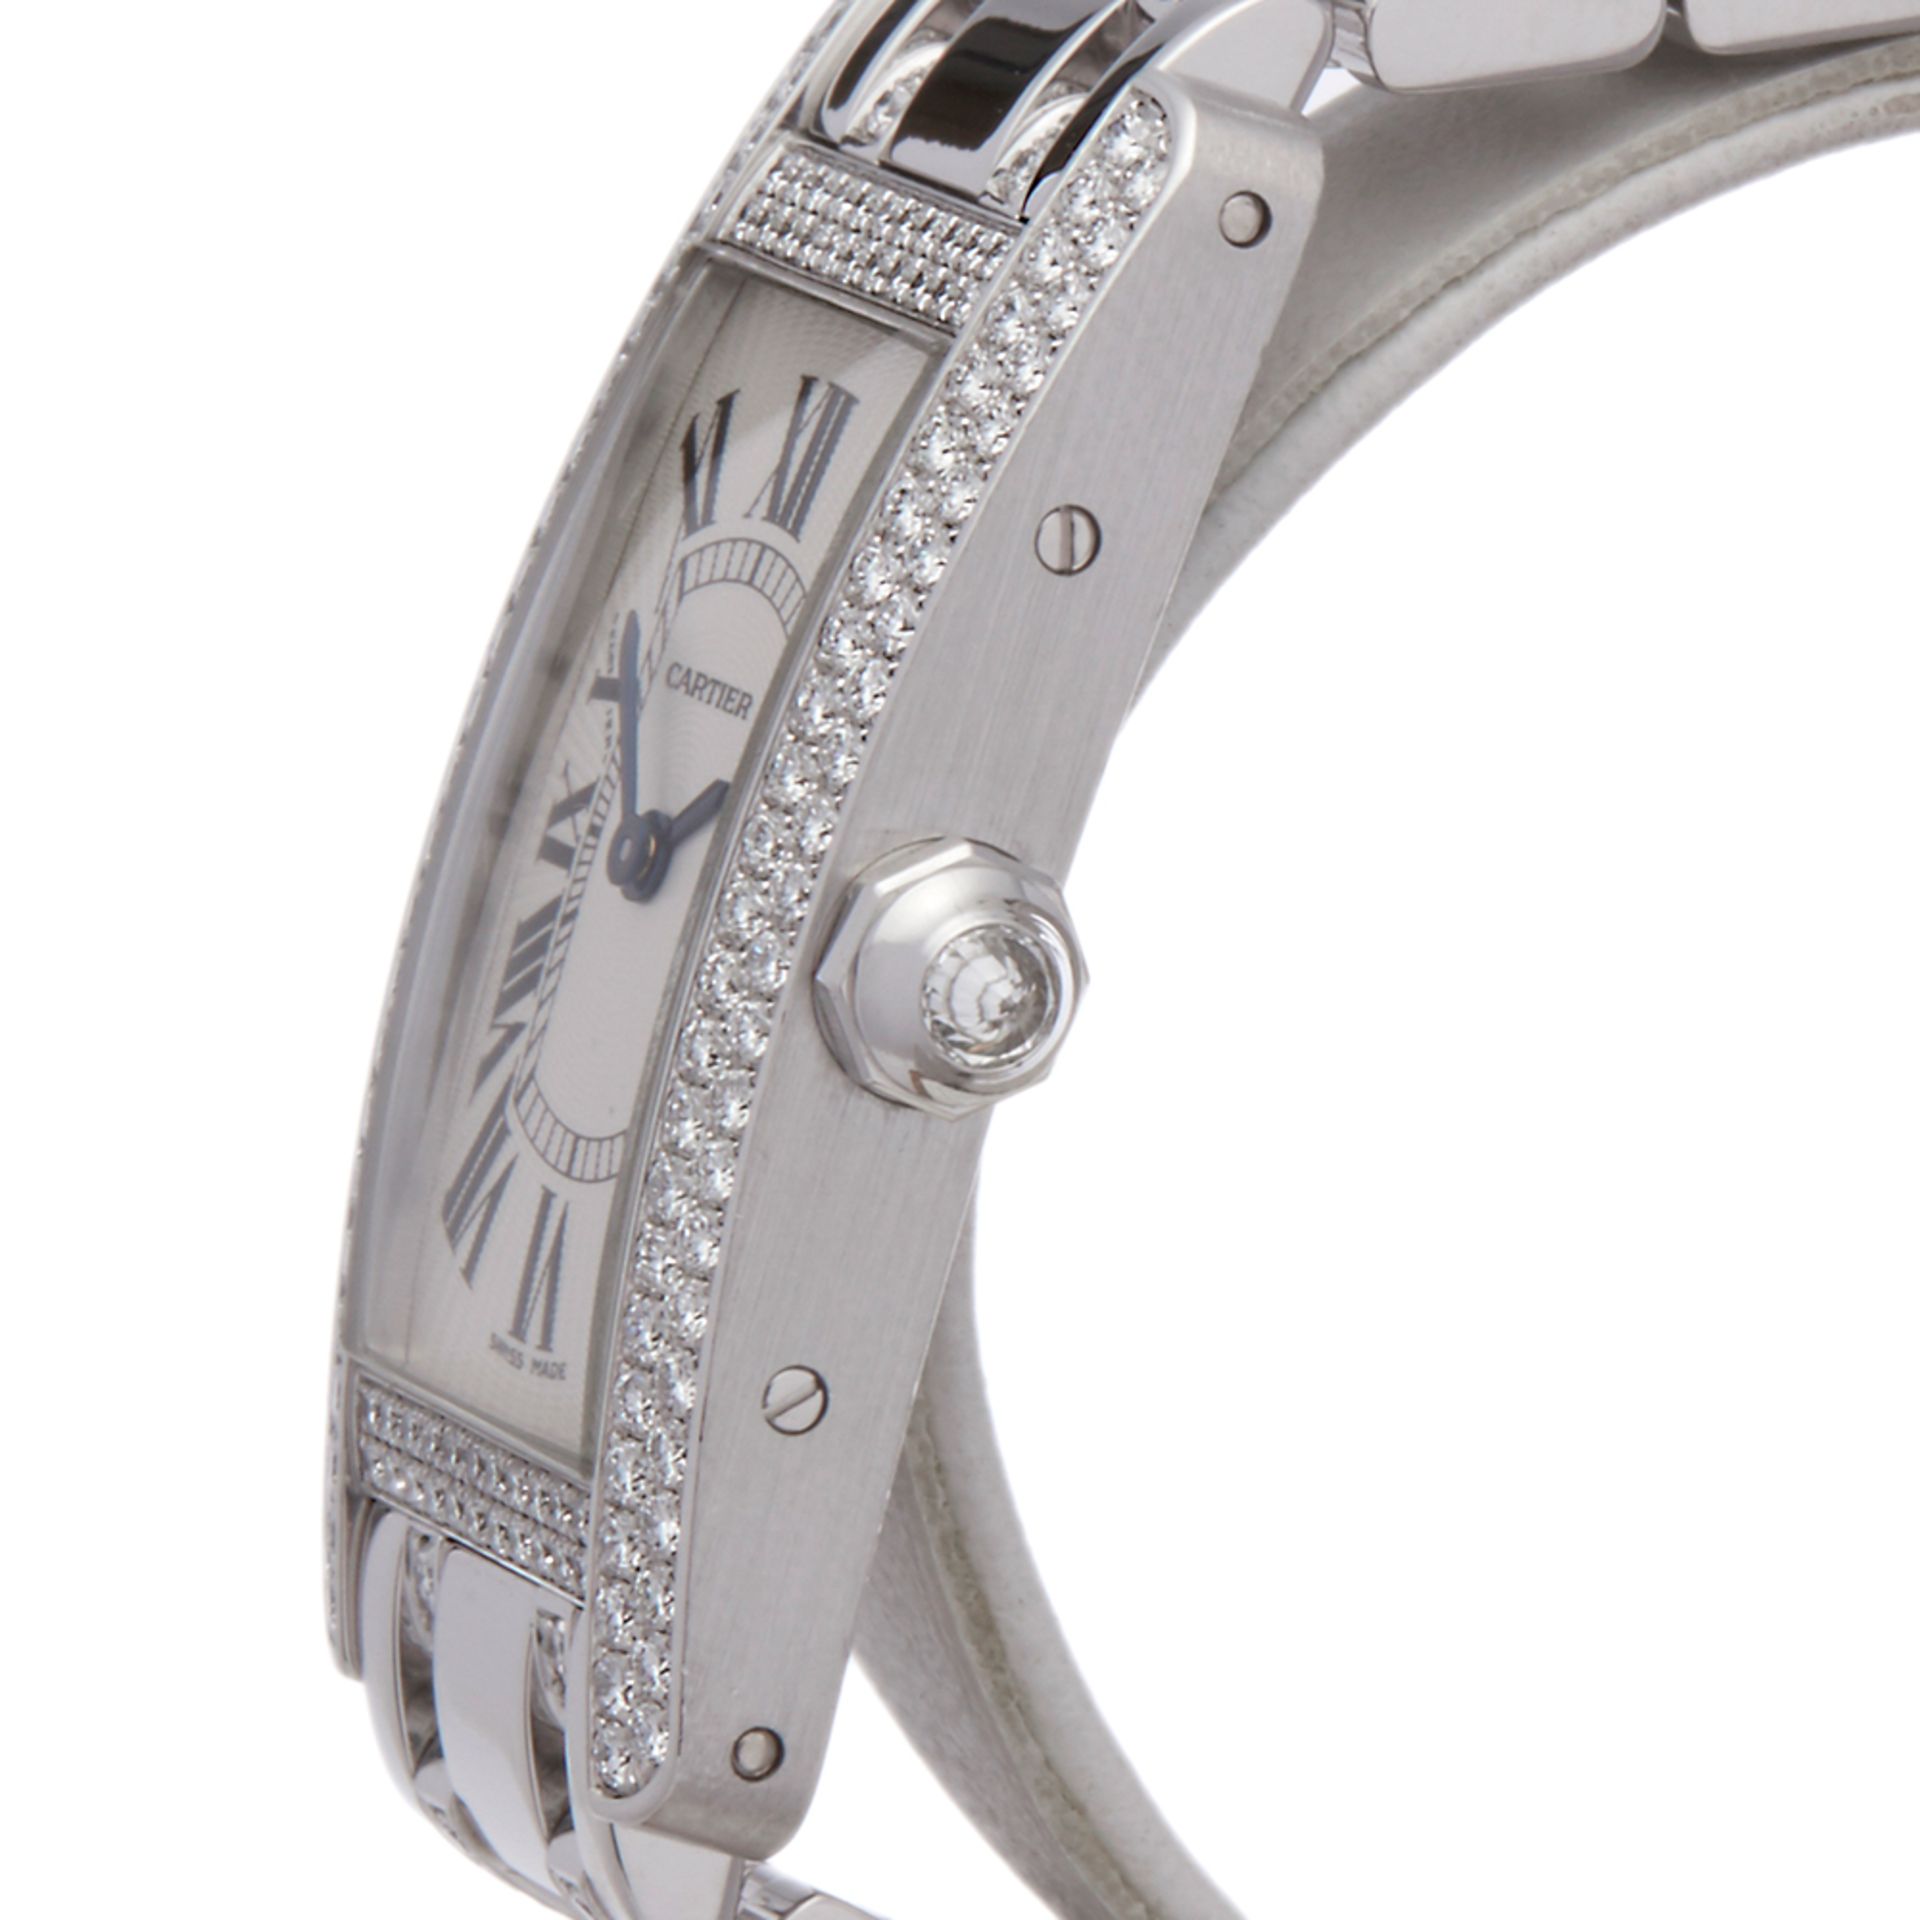 Cartier Tank Americaine 18k White Gold - 2489 - Image 4 of 8